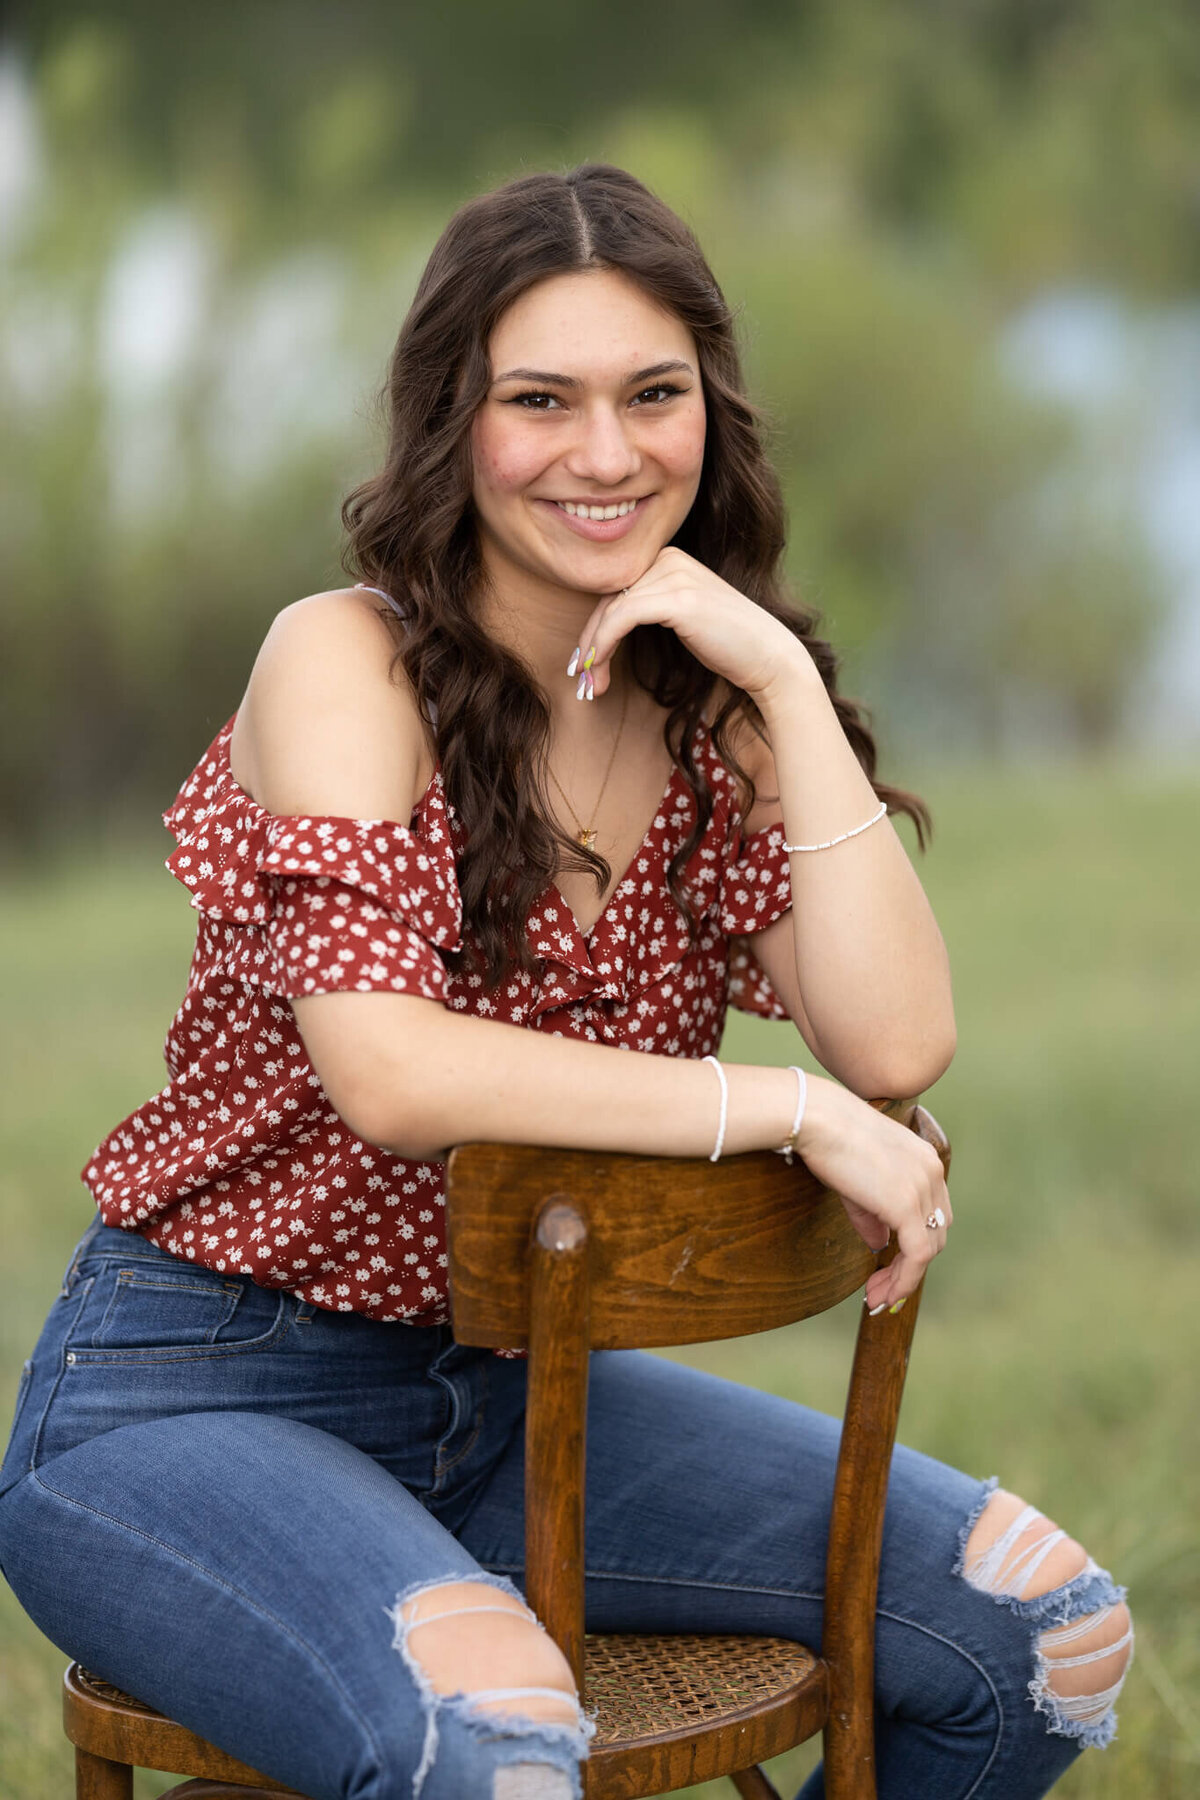 high school senior girl sitting on a chair wearing a red shirt and jeans